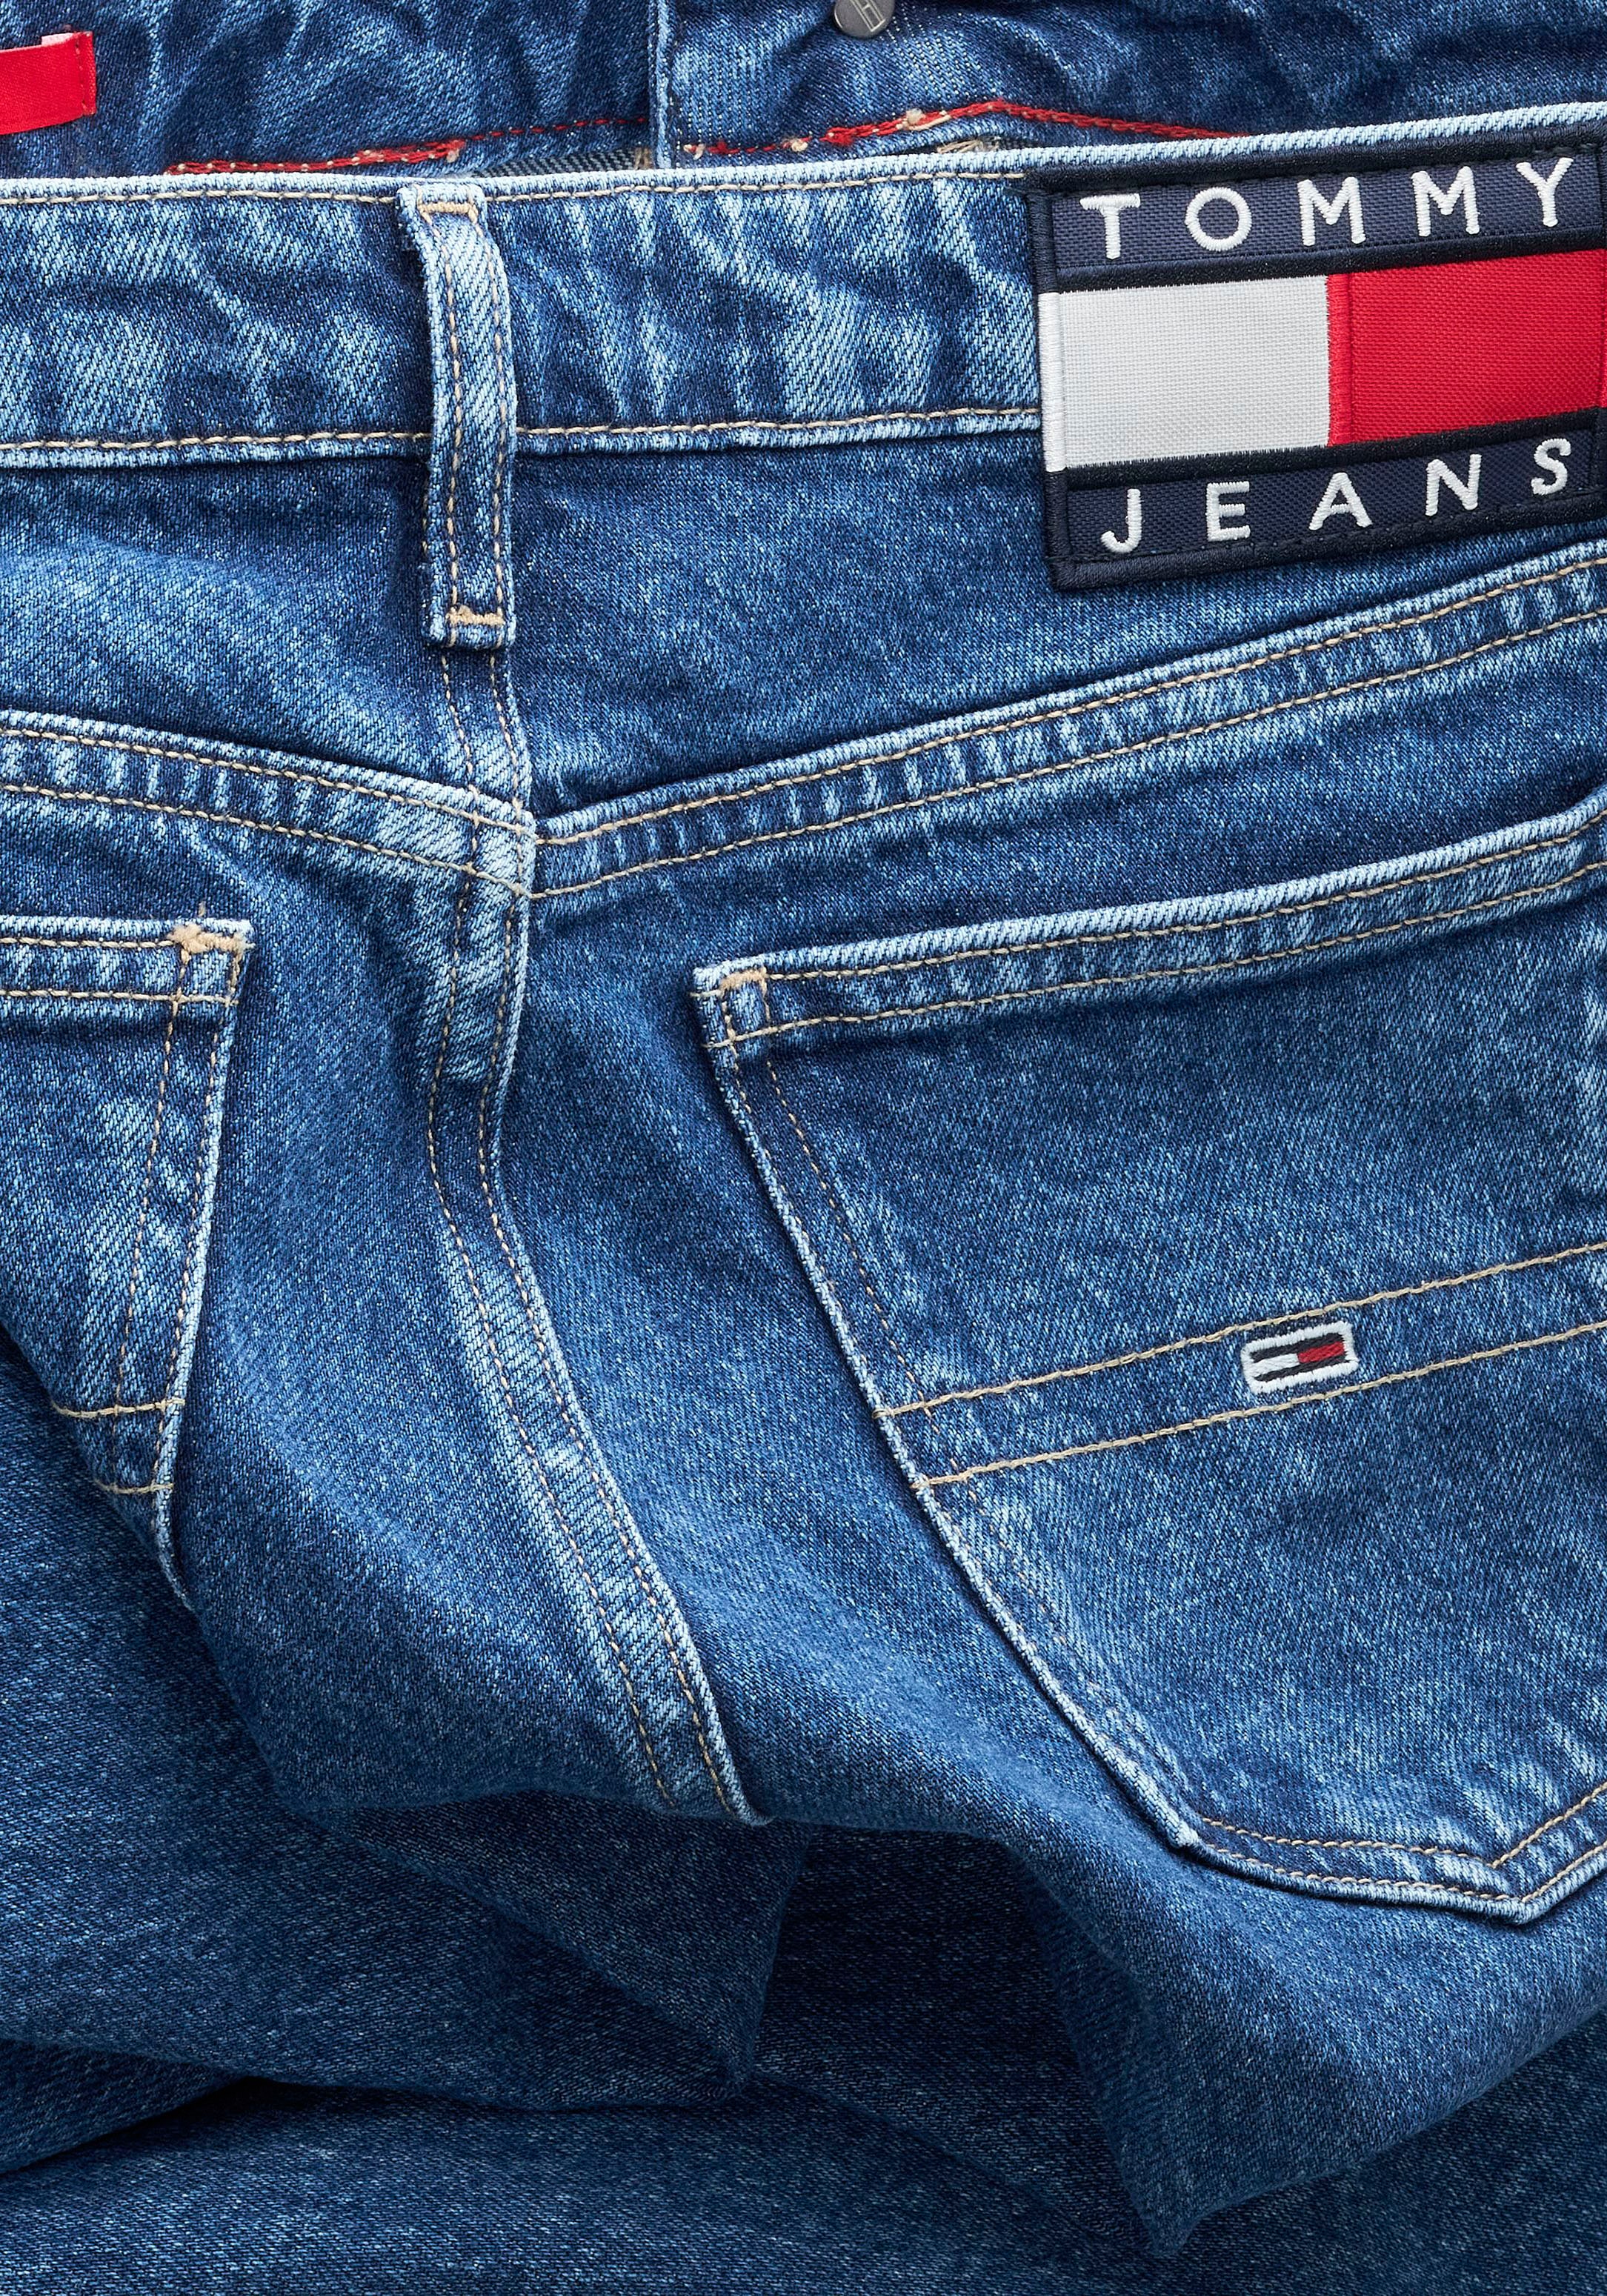 Jeans Logobadge mit Schlagjeans, Tommy bei Jeans Tommy ♕